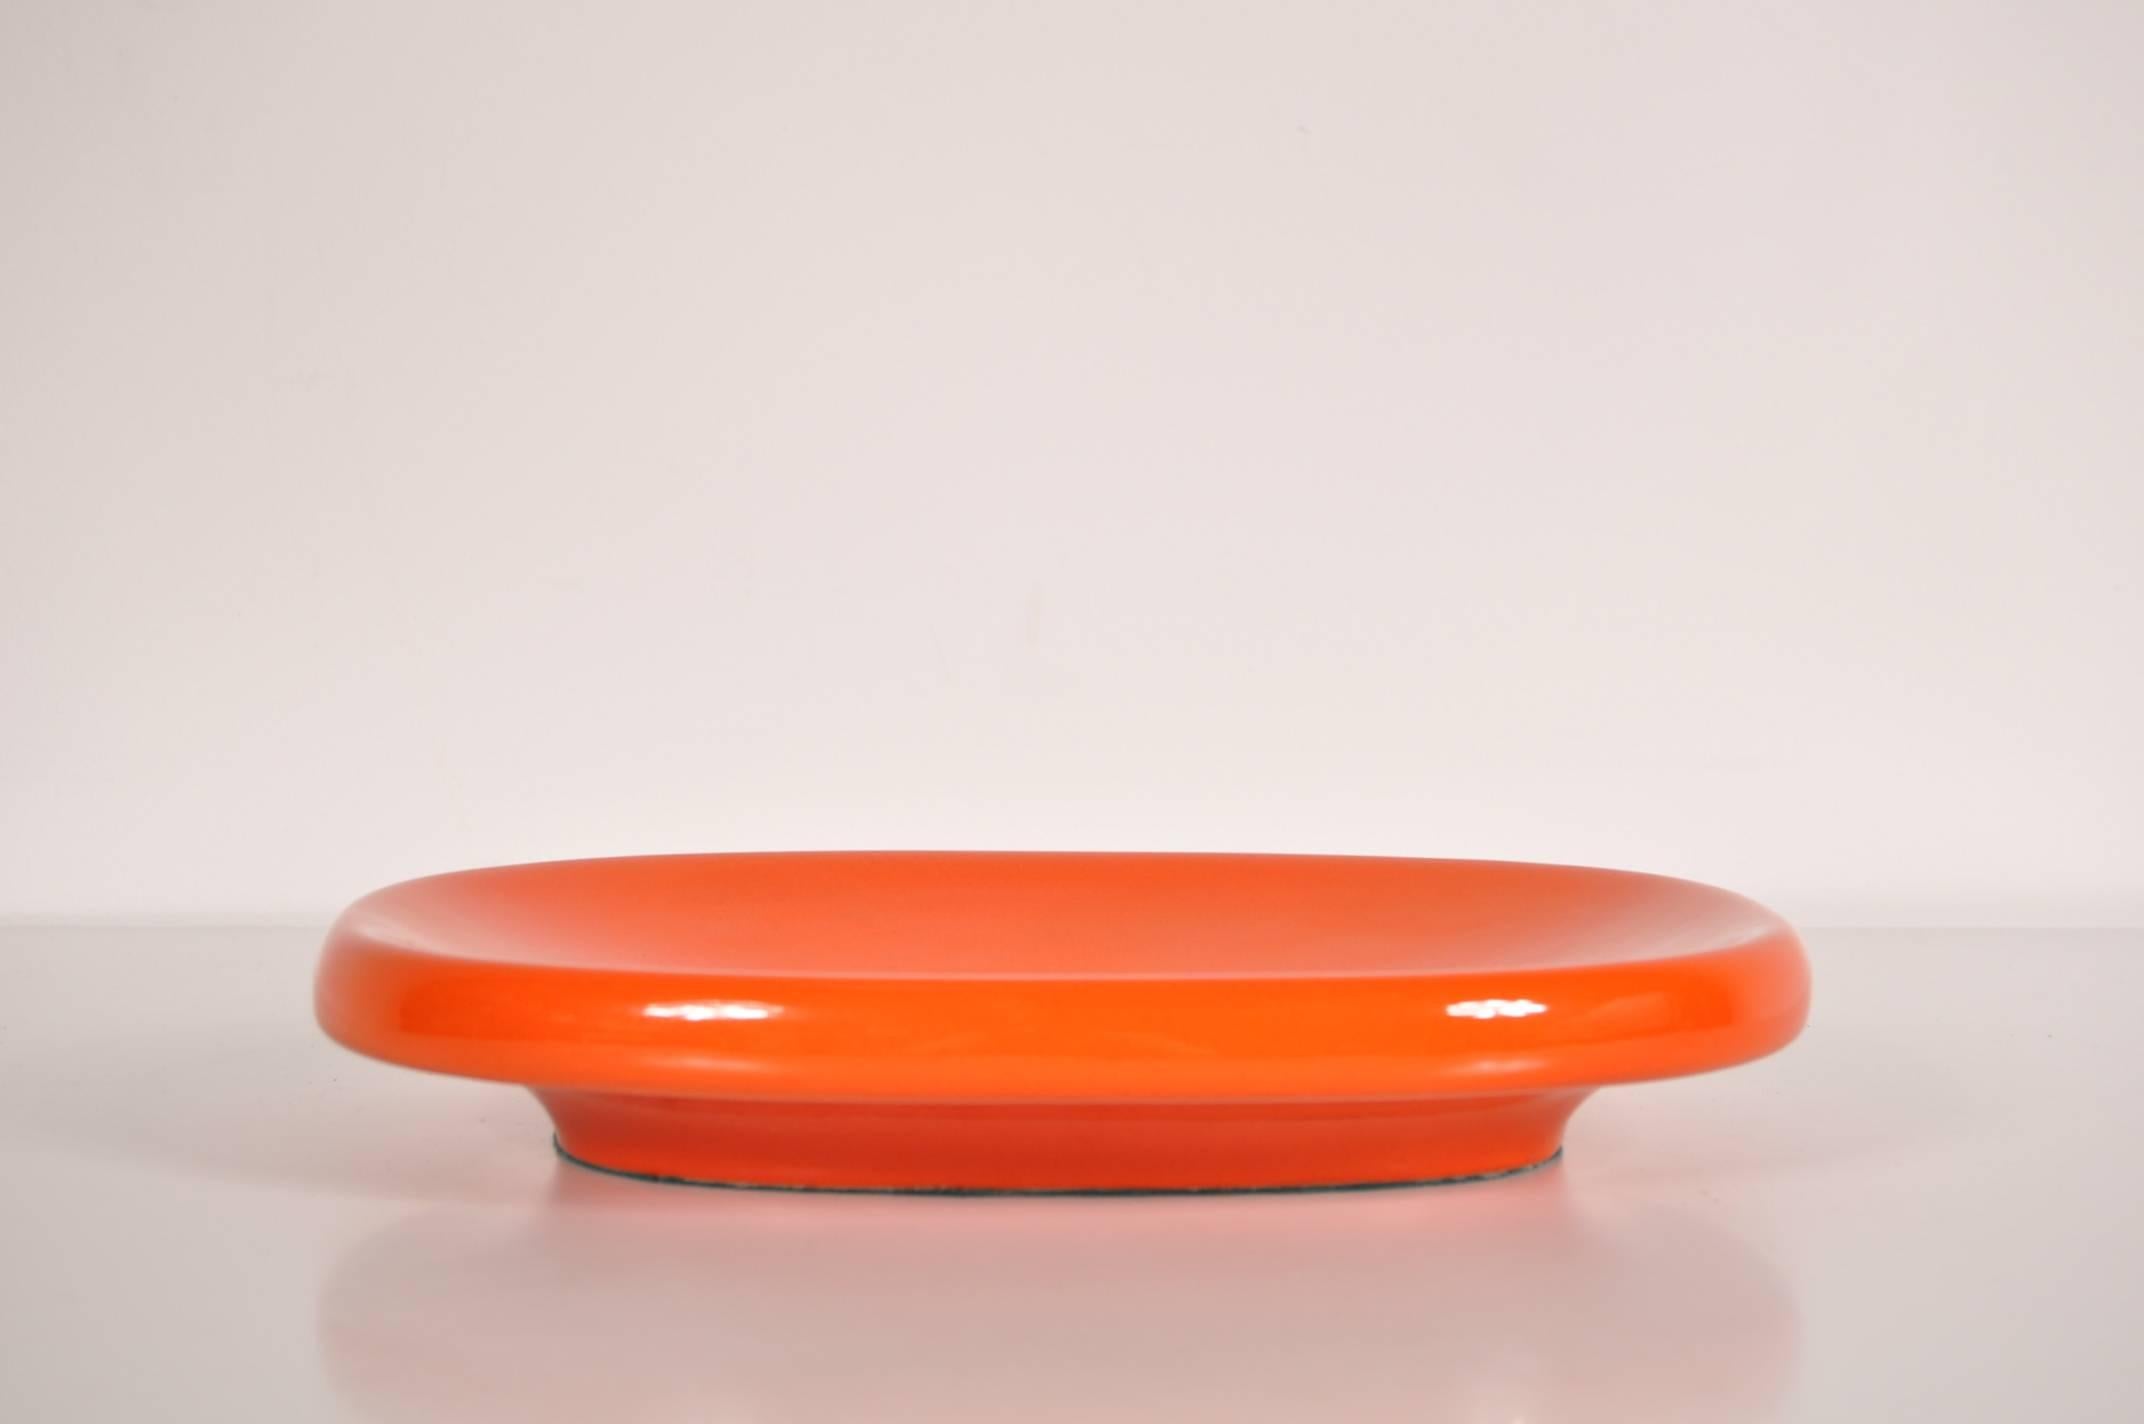 Unique bowl designed by Angelo Mangiarotti, manufactured for Danese in Italy, circa 1960.

This very rare piece is made of high quality orange ceramic with a beautiful patina. The bowl itself is oval shaped with a beautifuly finished base lifting